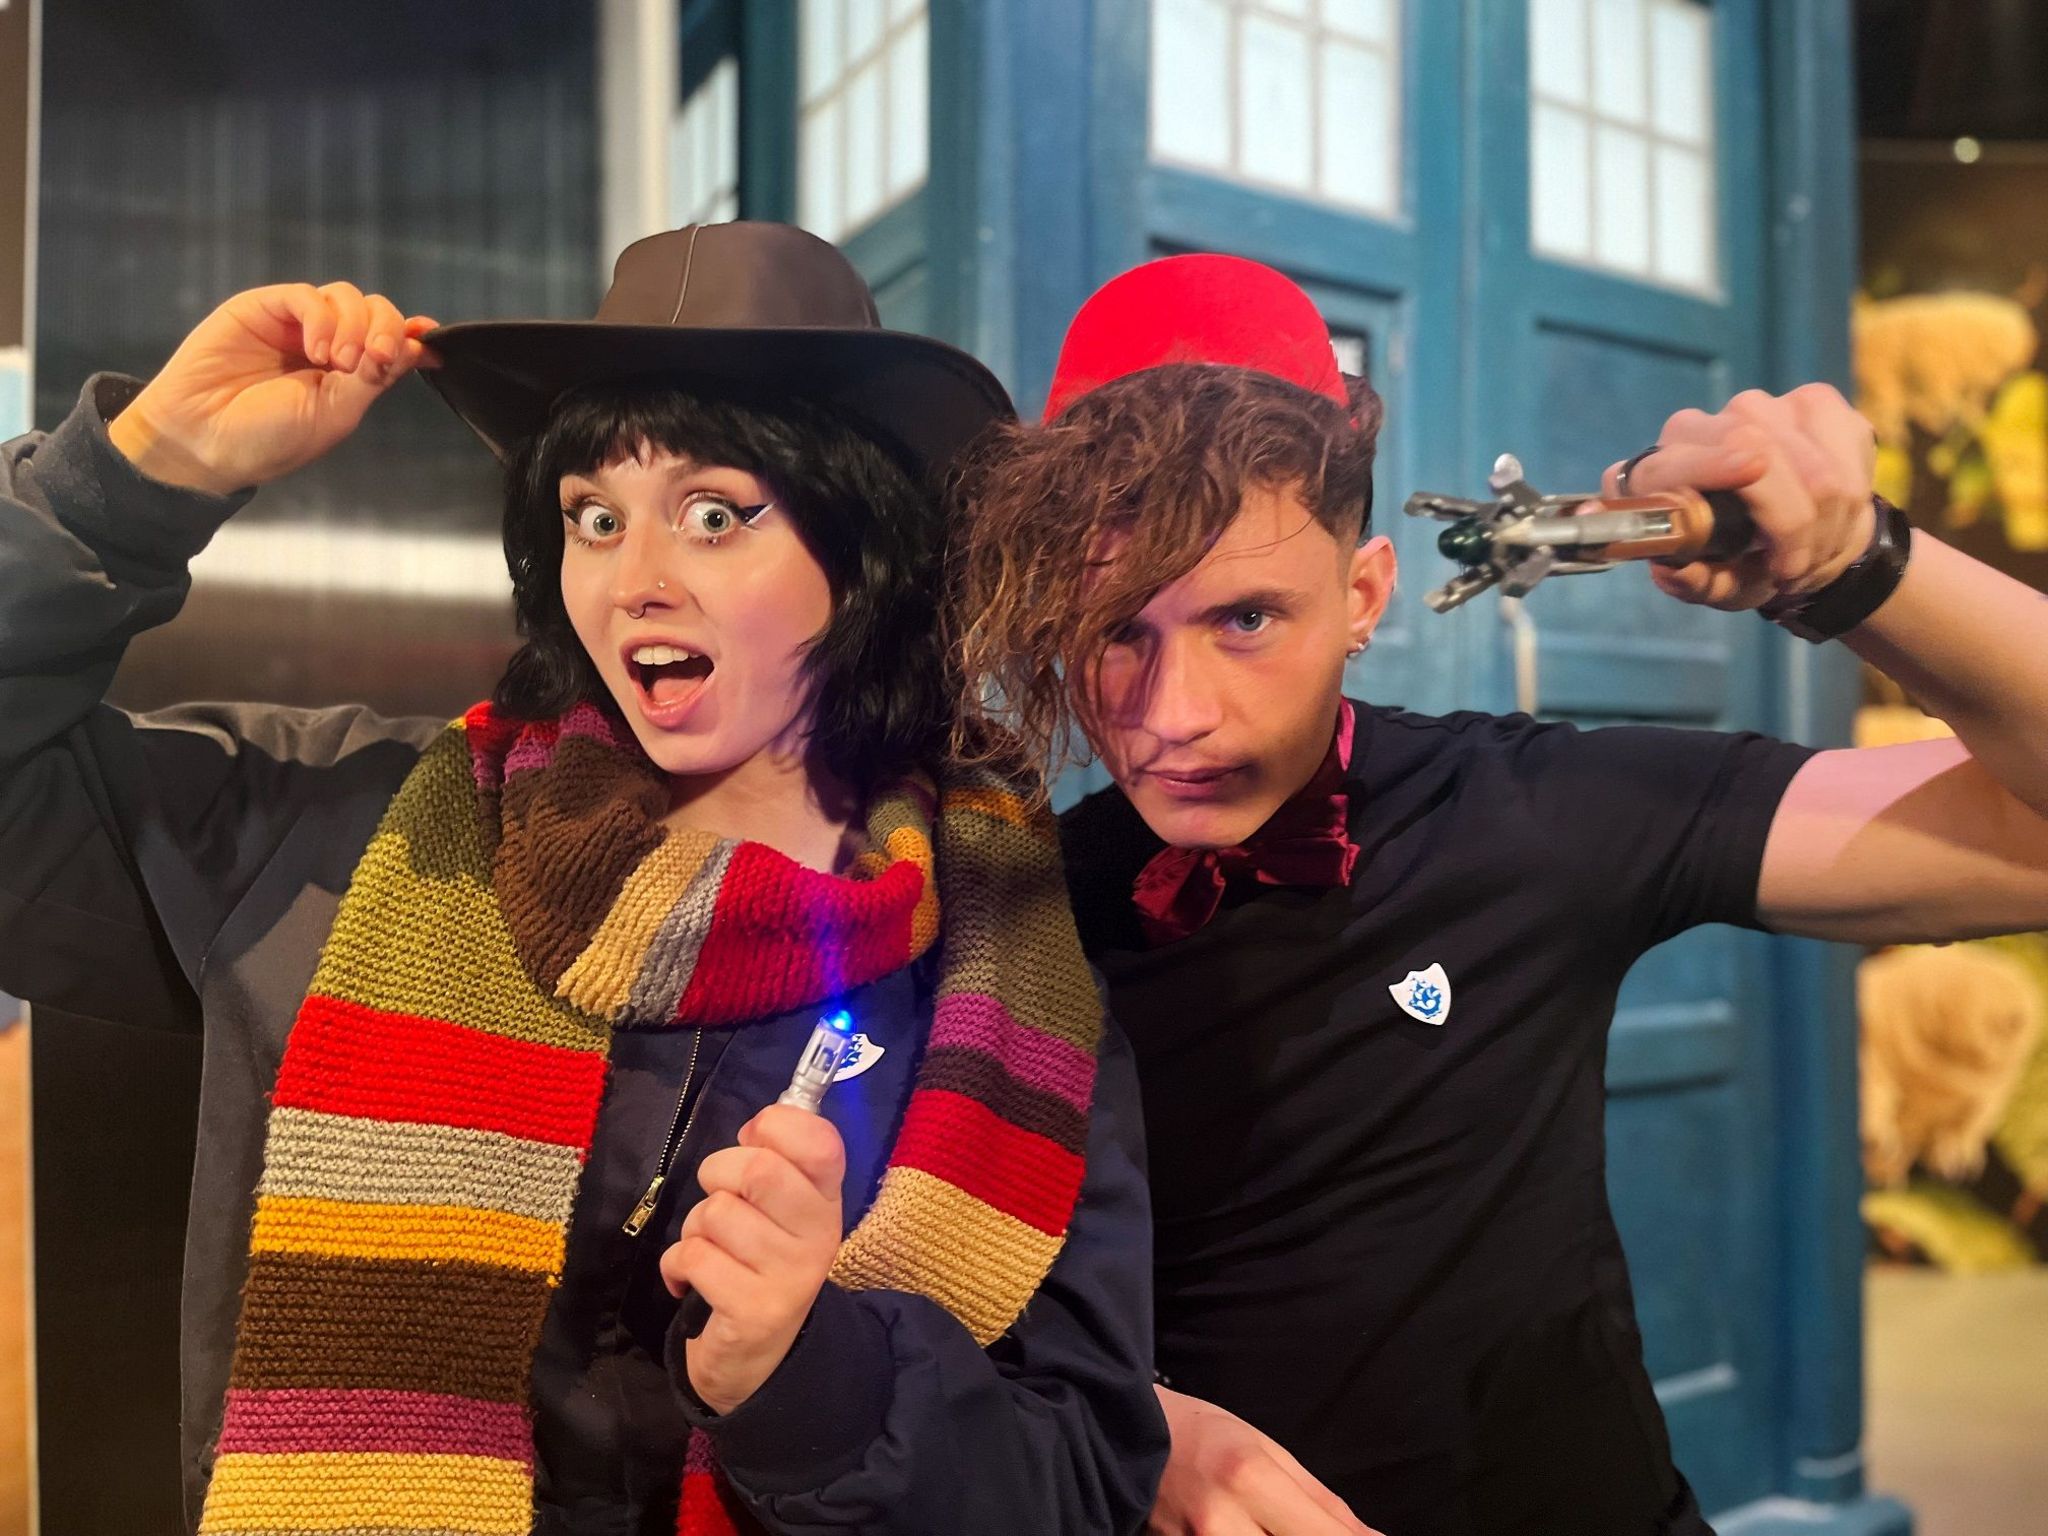 Abby Cook, wearing a stripy scarf and large hat, with Joel Mawhinney. Both are holding sonic screwdrivers. There is a Tardis in the background.